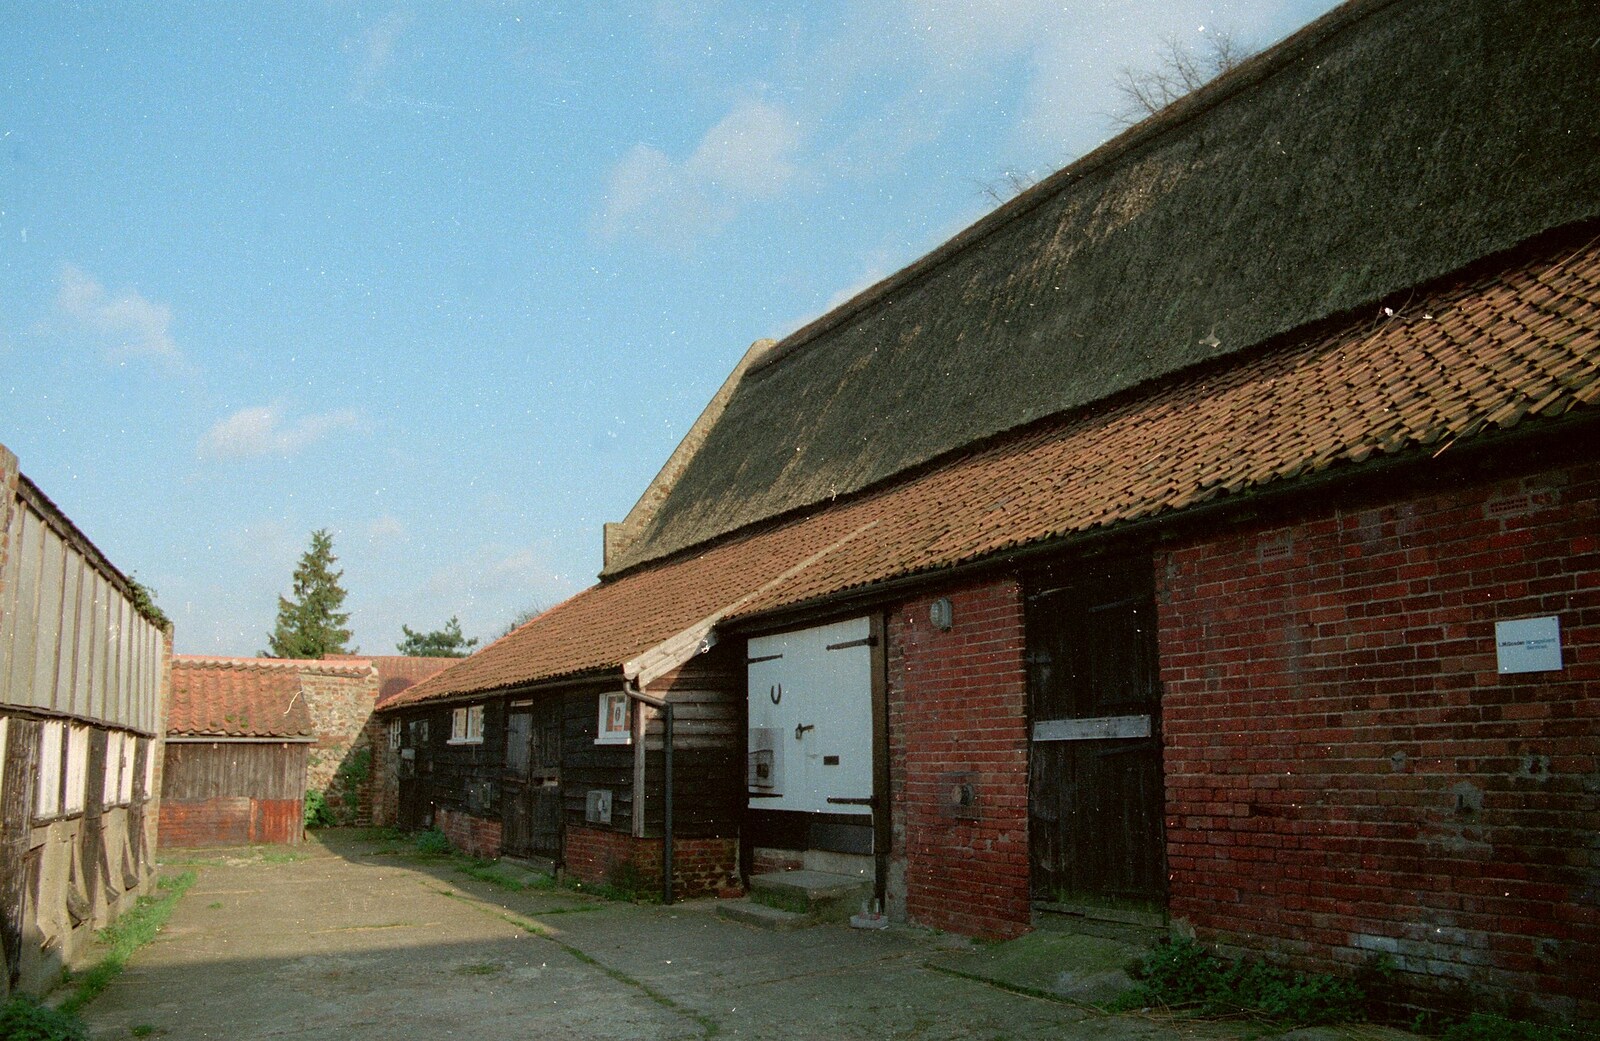 Some farm buildings from Sean Visits and a Trip to Costessey, Norwich, Norfolk - 14th October 1987